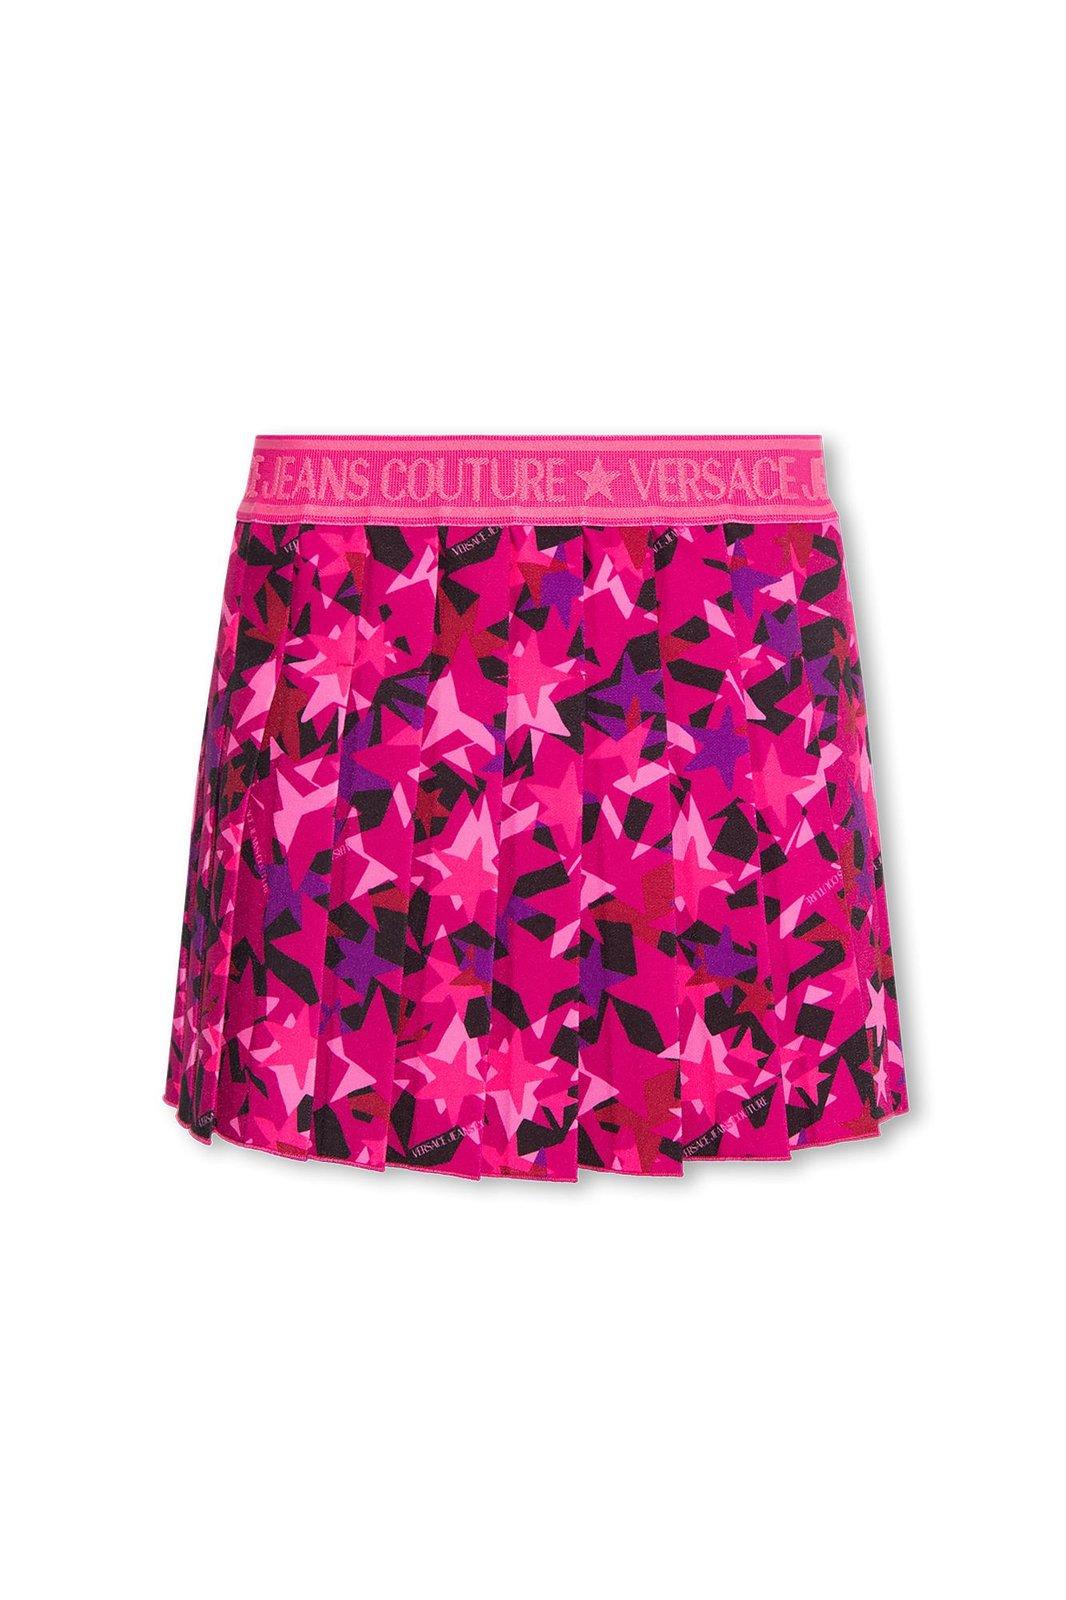 VERSACE JEANS COUTURE ABSTRACT-PRINTED PLEATED MINI SKIRT